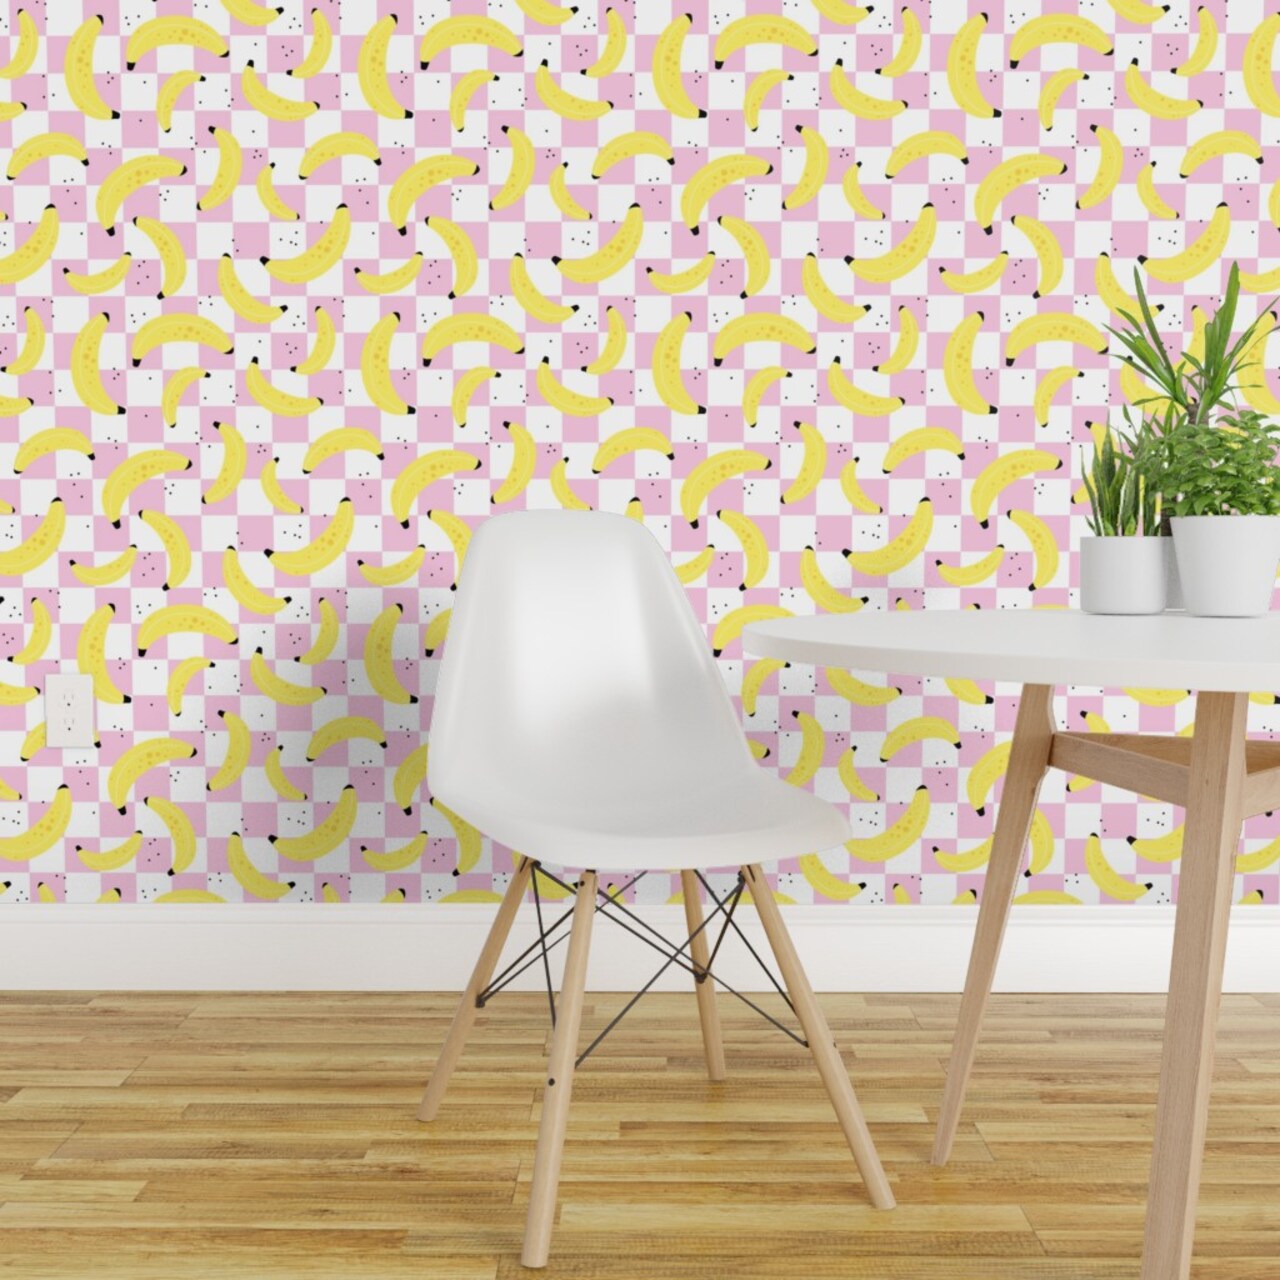 Peel &#x26; Stick Wallpaper 2FT Wide Checkerboard Plaid Retro Fruit Nineties Summer Banana Fun Whimsical Pink Quirky Custom Removable Wallpaper by Spoonflower